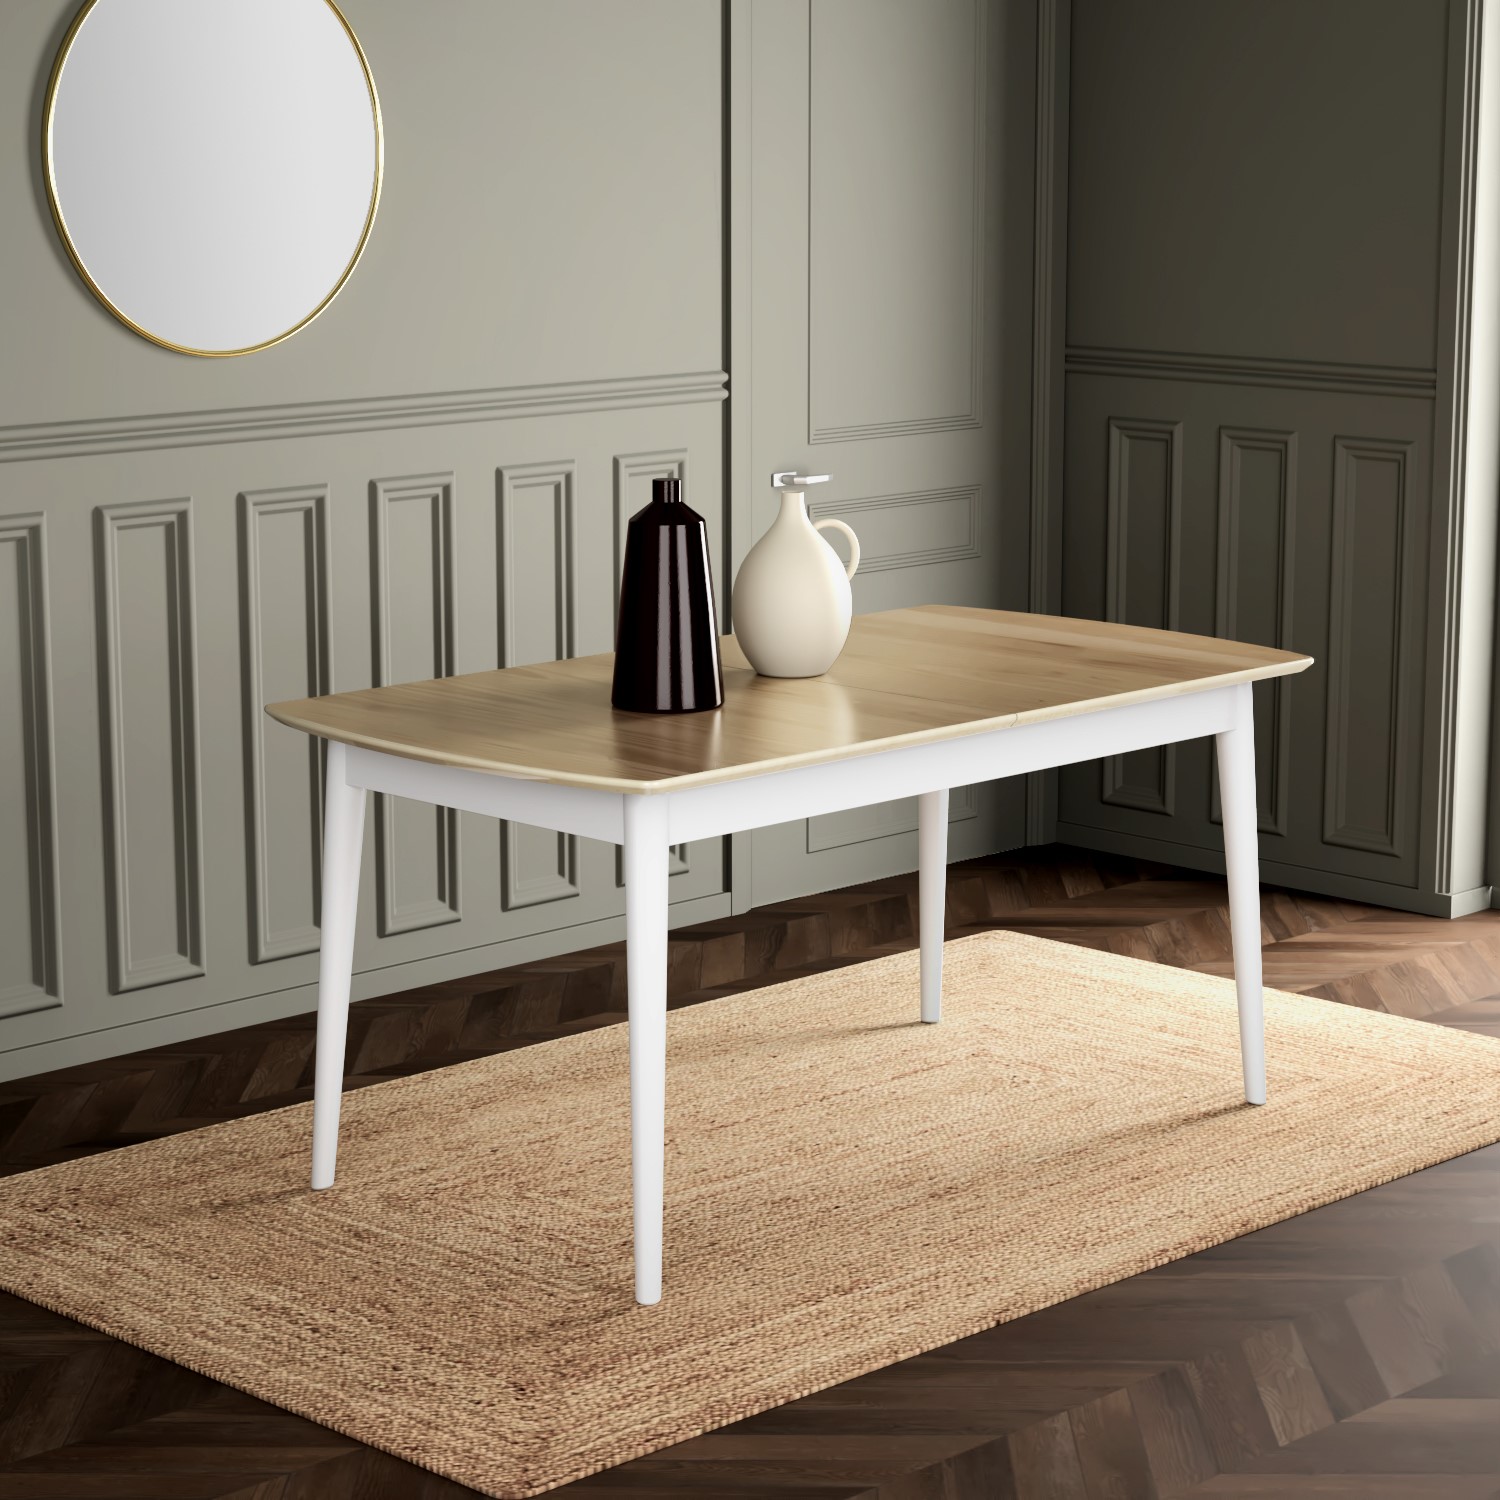 Large Oak And White Extendable Dining, How Large Is A Table That Seats 8